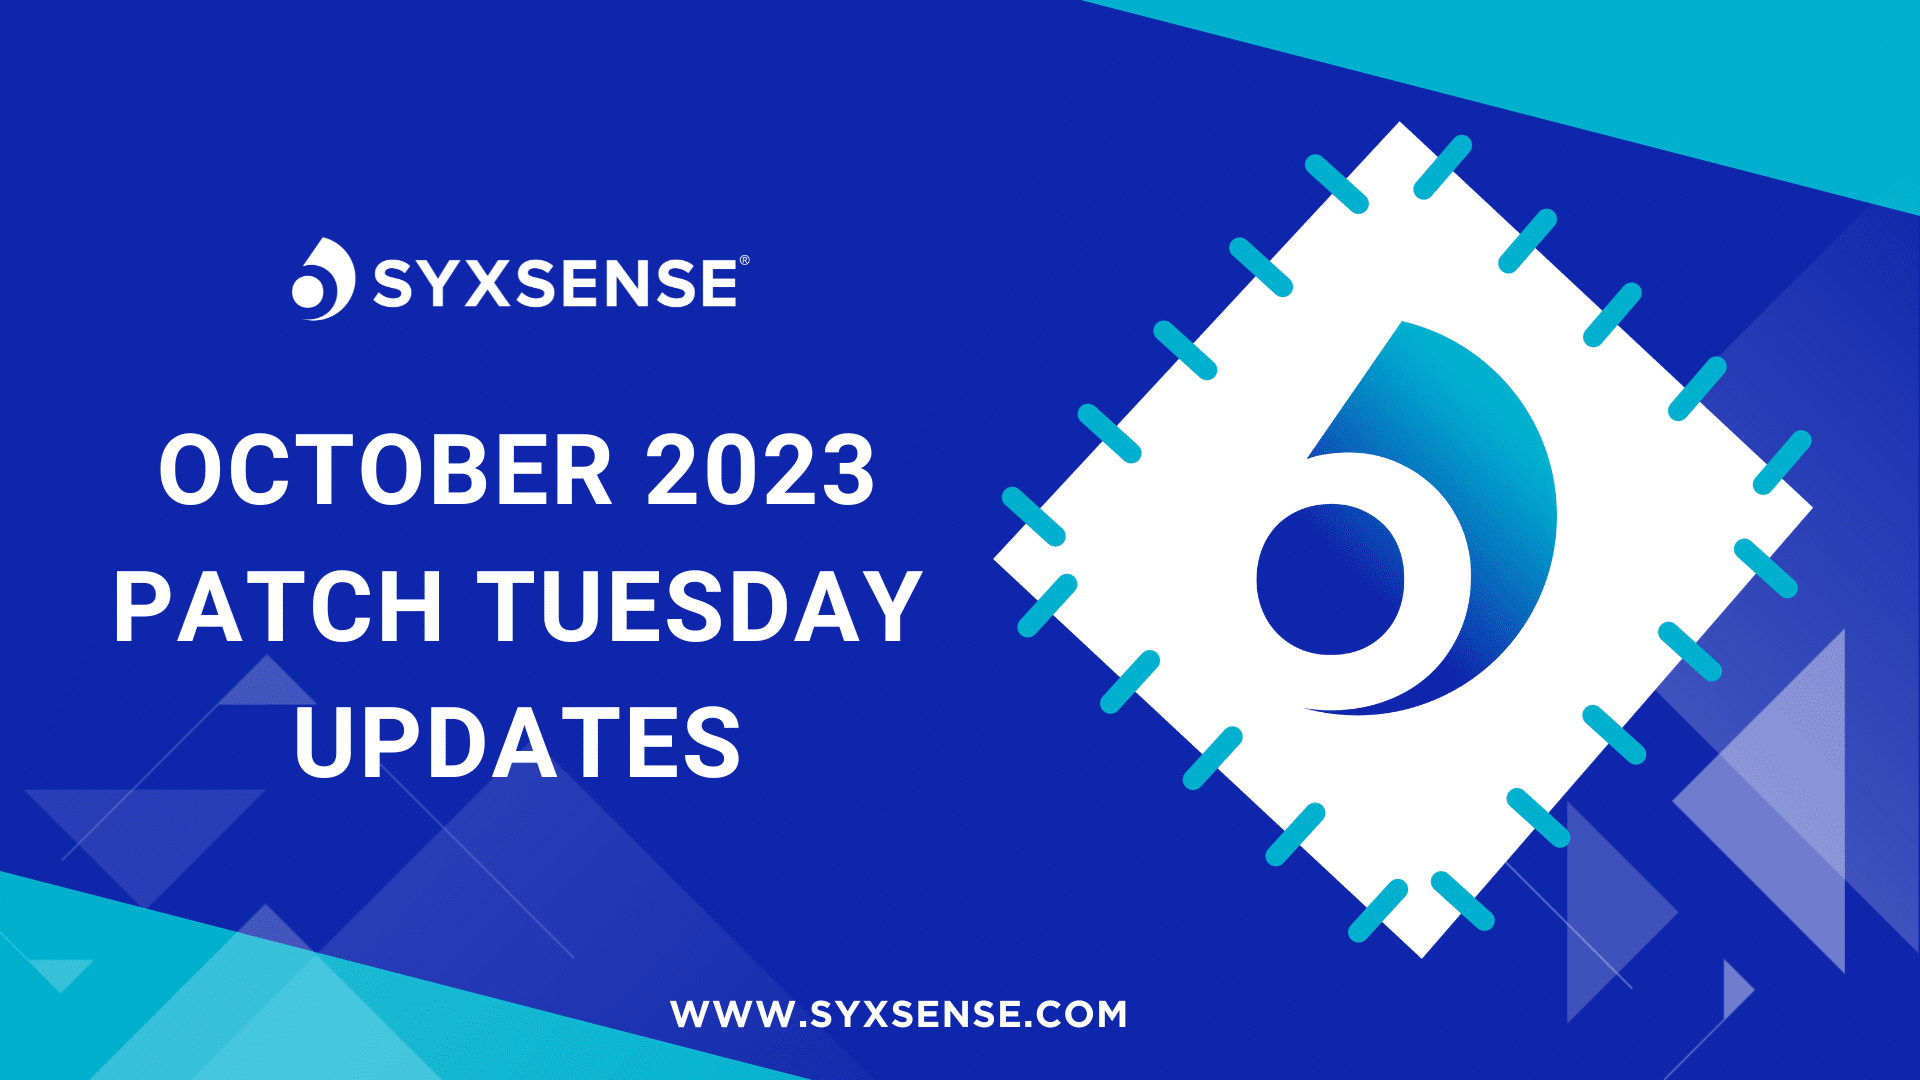 October 2023 Patch Tuesday banner